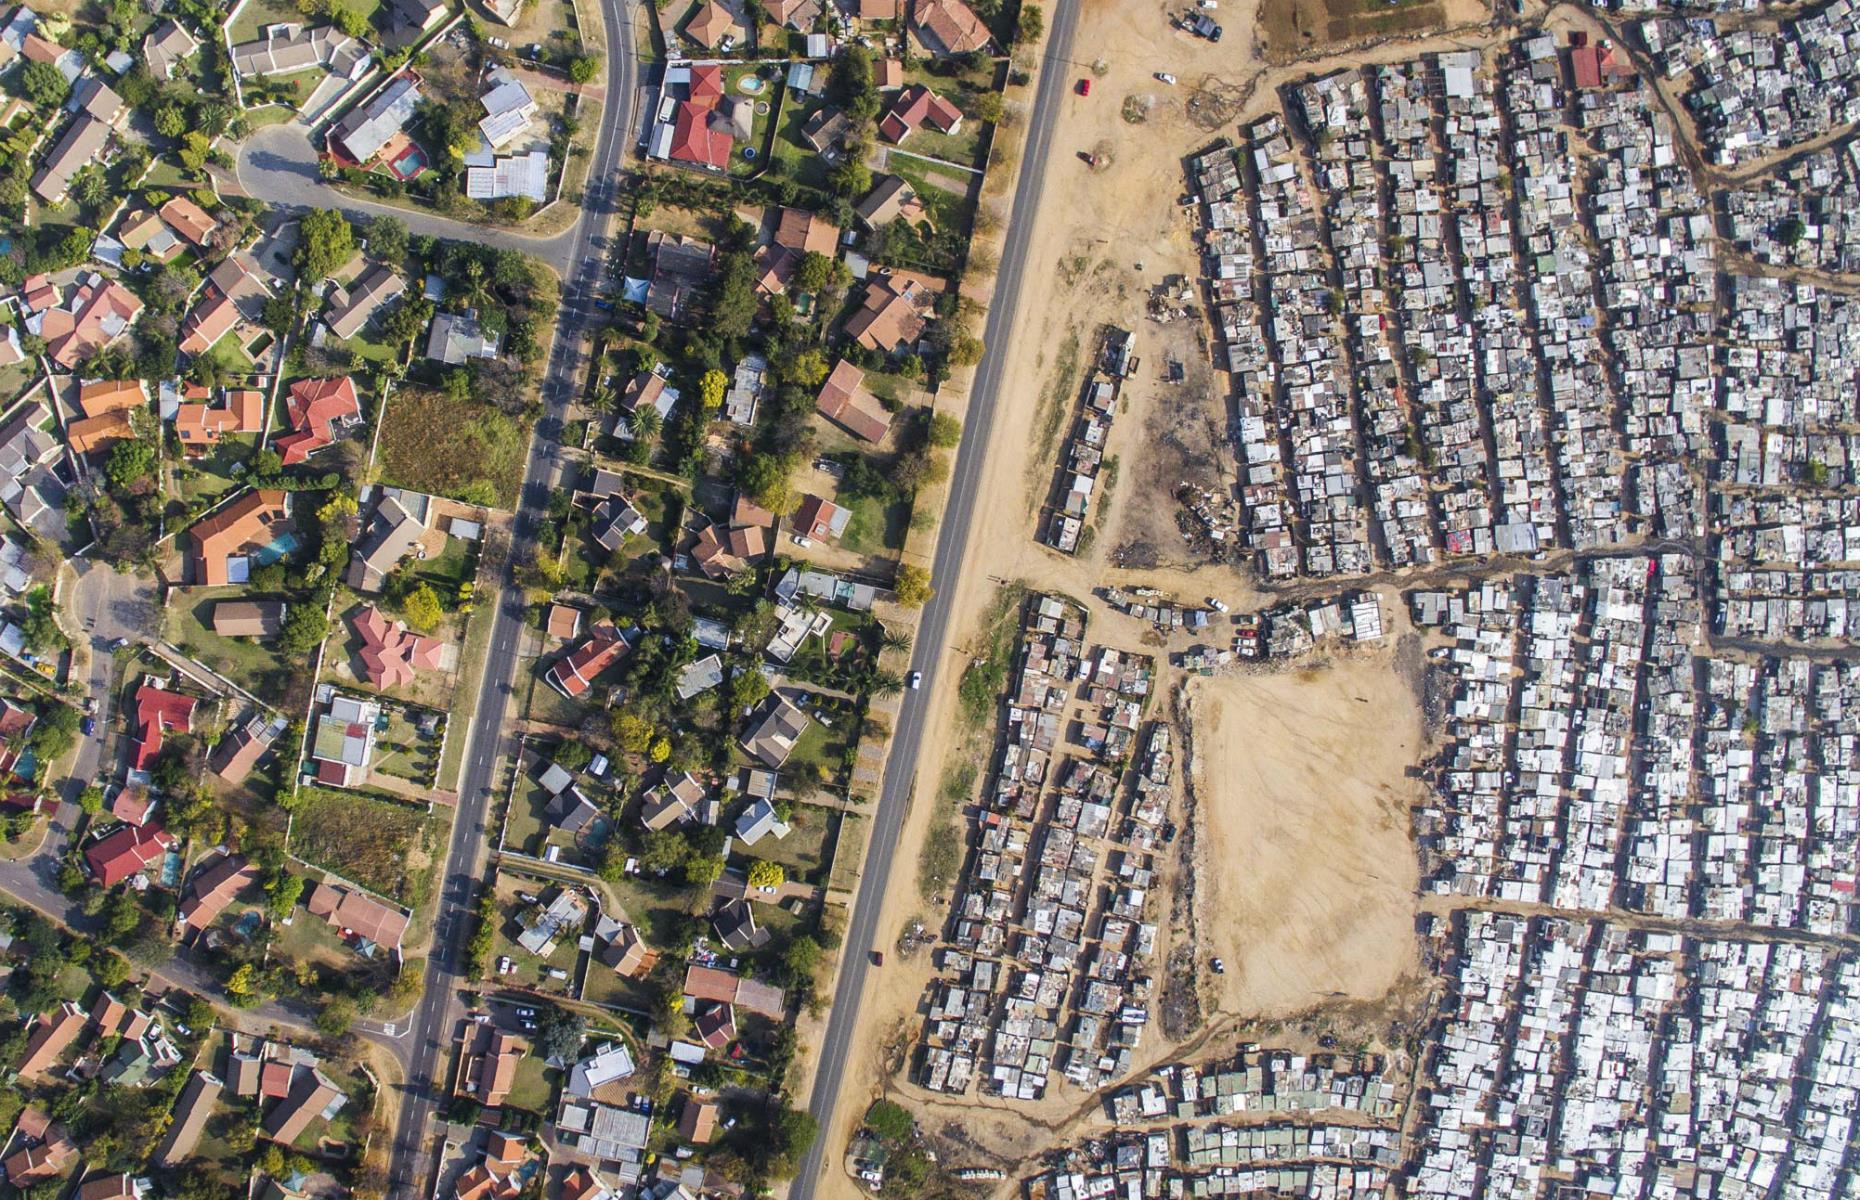 South Africa was named as the most unequal country in the world in 2018 by a World Bank report. Despite the end of Apartheid in 1994, since 2011 at least 2.5 million South Africans have fallen into poverty. This can be seen in images such as this one, taken over  Johannesburg, where the Kya Sands slum faces the affluent, leafy suburb of Bloubosrand. Large houses with swimming pools are separated by just a single-track road from the poverty of the tin-roofed shacks.